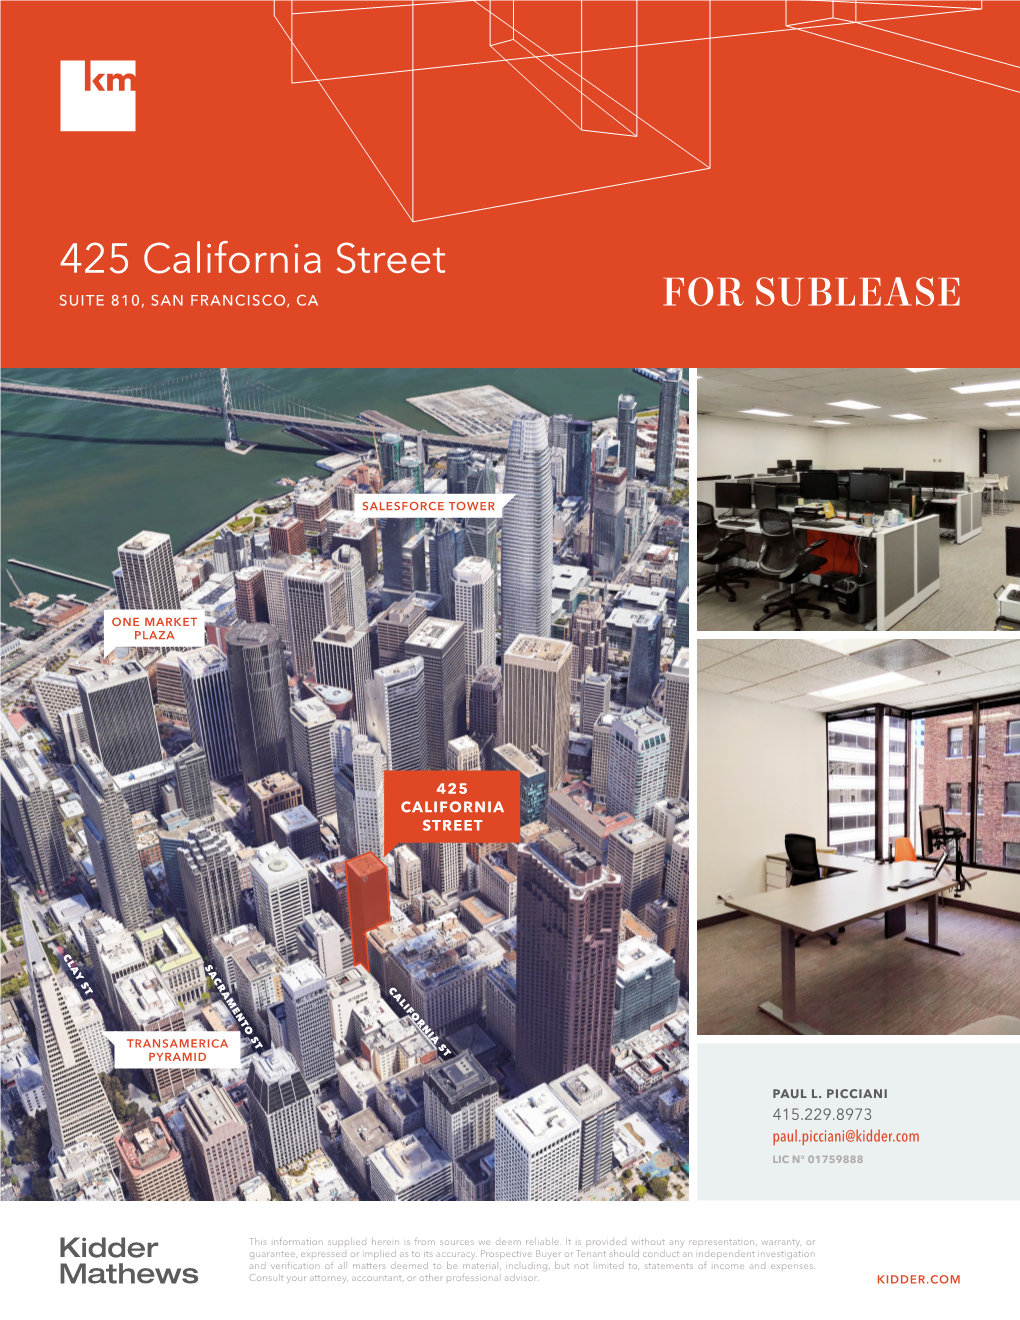 425 California Street SUITE 810, SAN FRANCISCO, CA for SUBLEASE